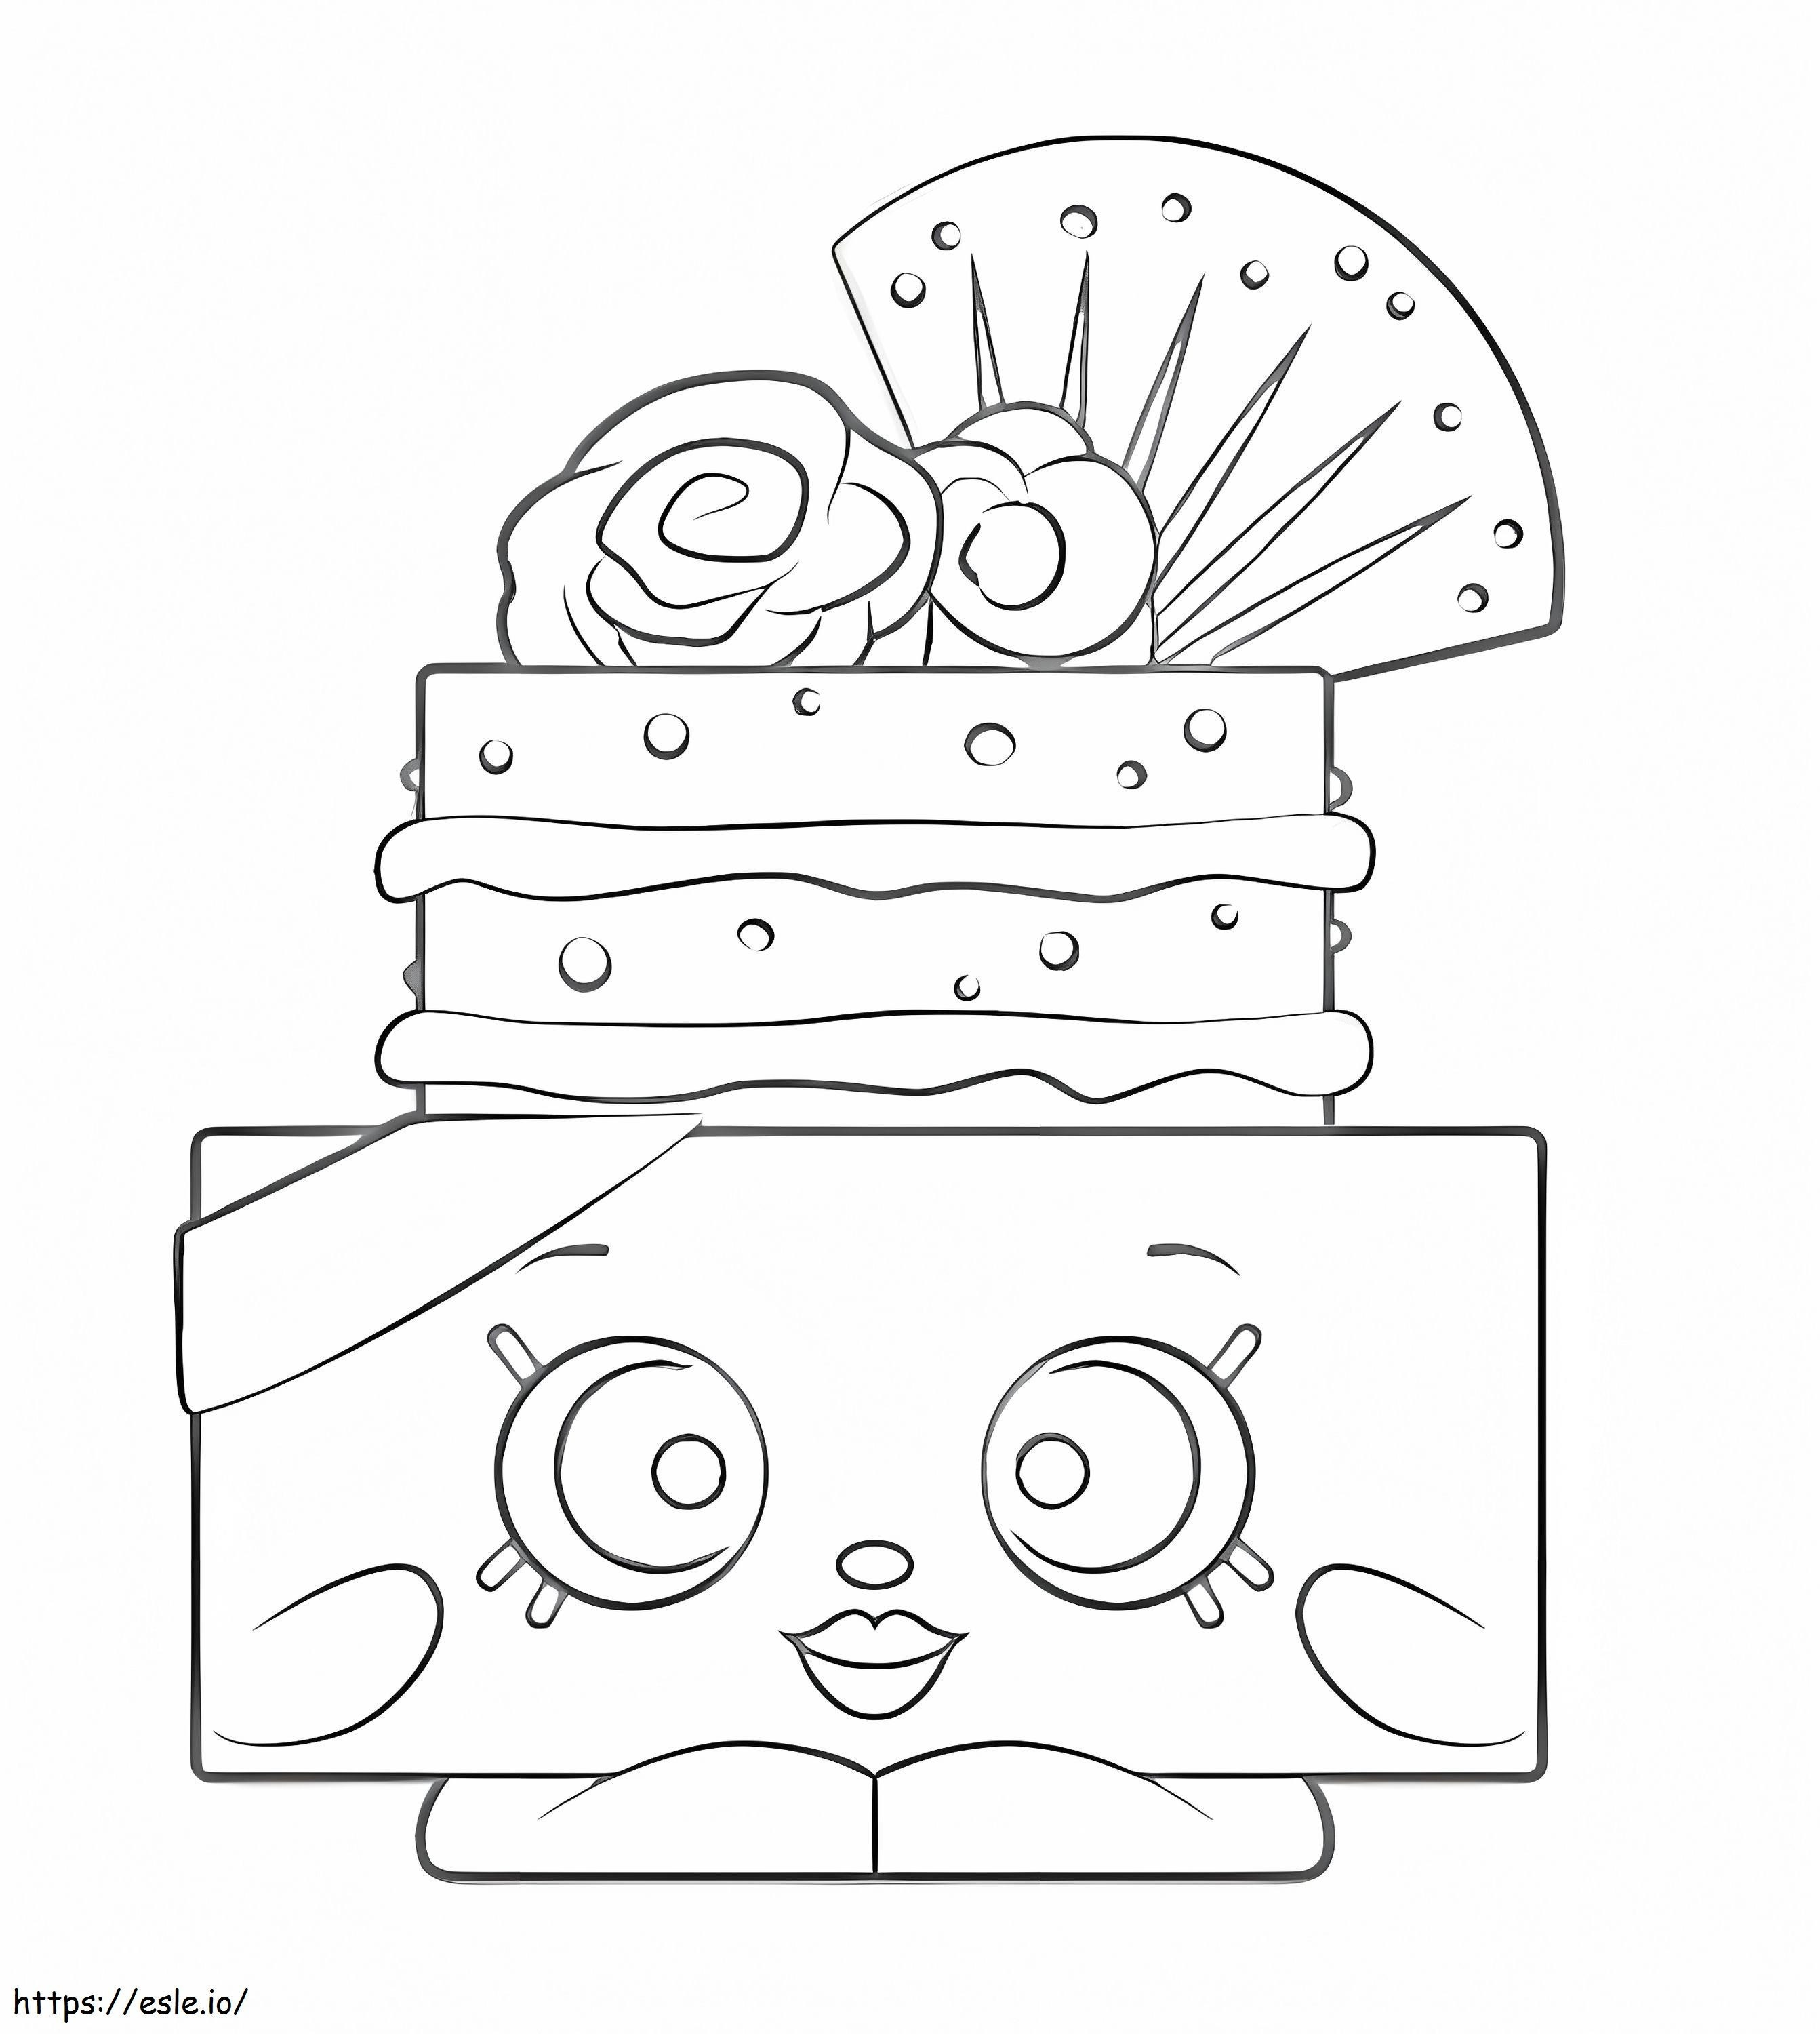 Pastry Chef To Claudia coloring page